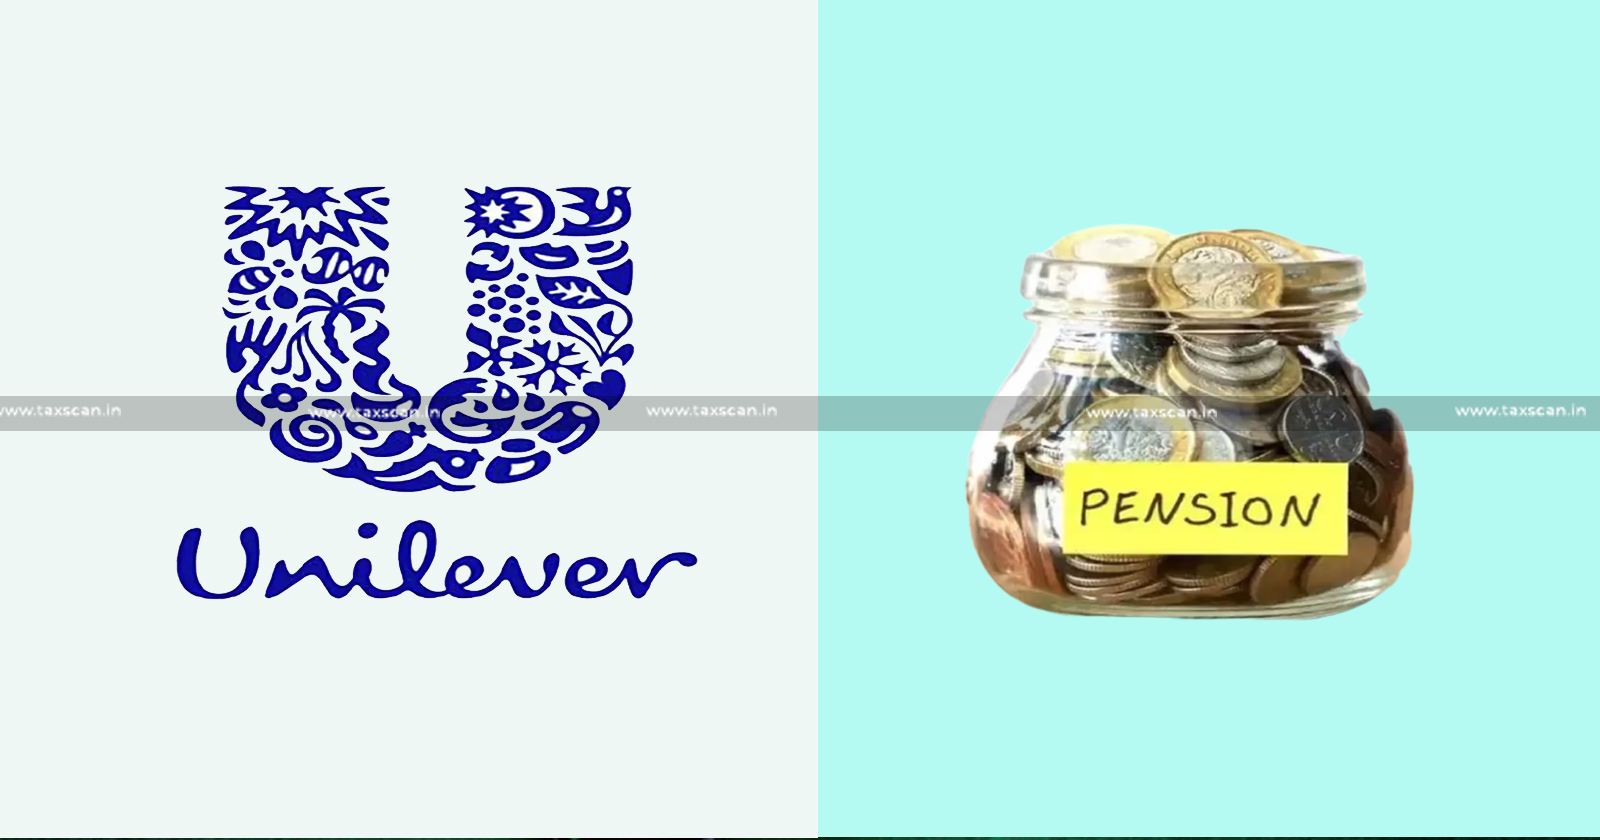 Provision for retirement pension - Provision for retirement pension of Hindustan Unilever employees - Business Purpose - ITAT allows deduction - ITAT - taxscan